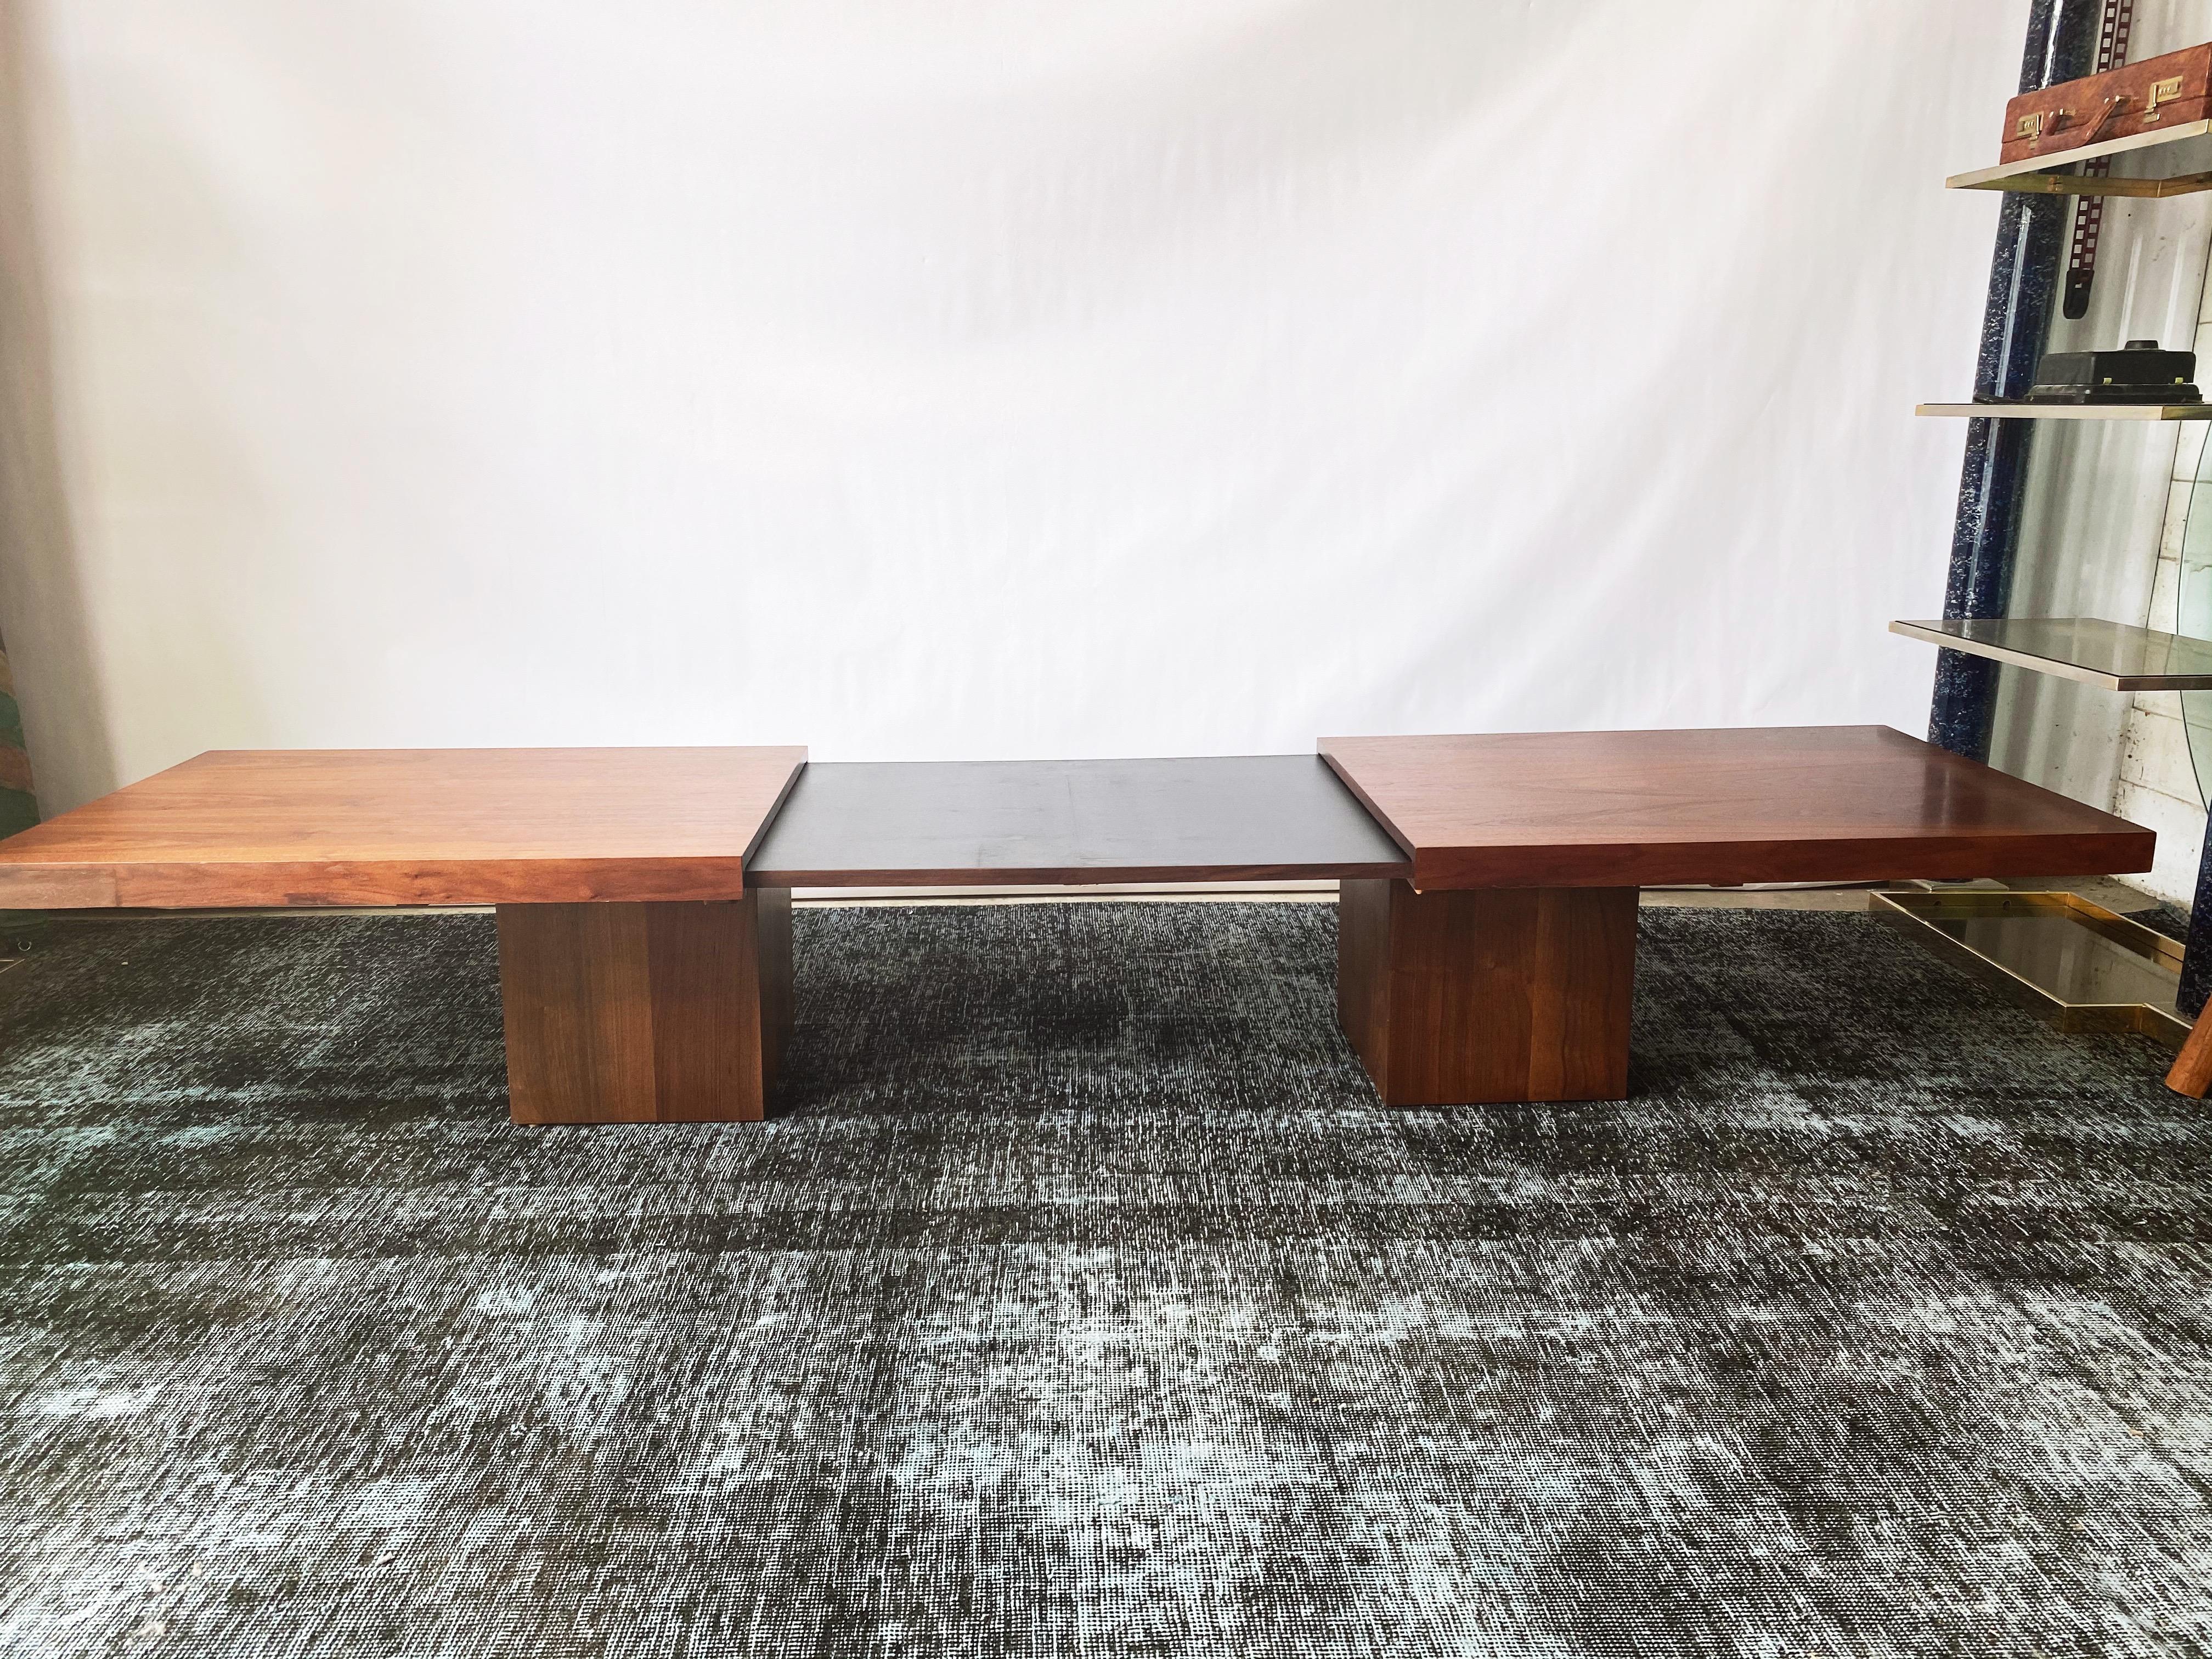 This vintage walnut expandable coffee table by John Seal for Brown Saltman is in overall excellent condition. This coffee table draws apart to reveal a black laminate interior, a perfect surface for beverages and heavy use. The minimal design